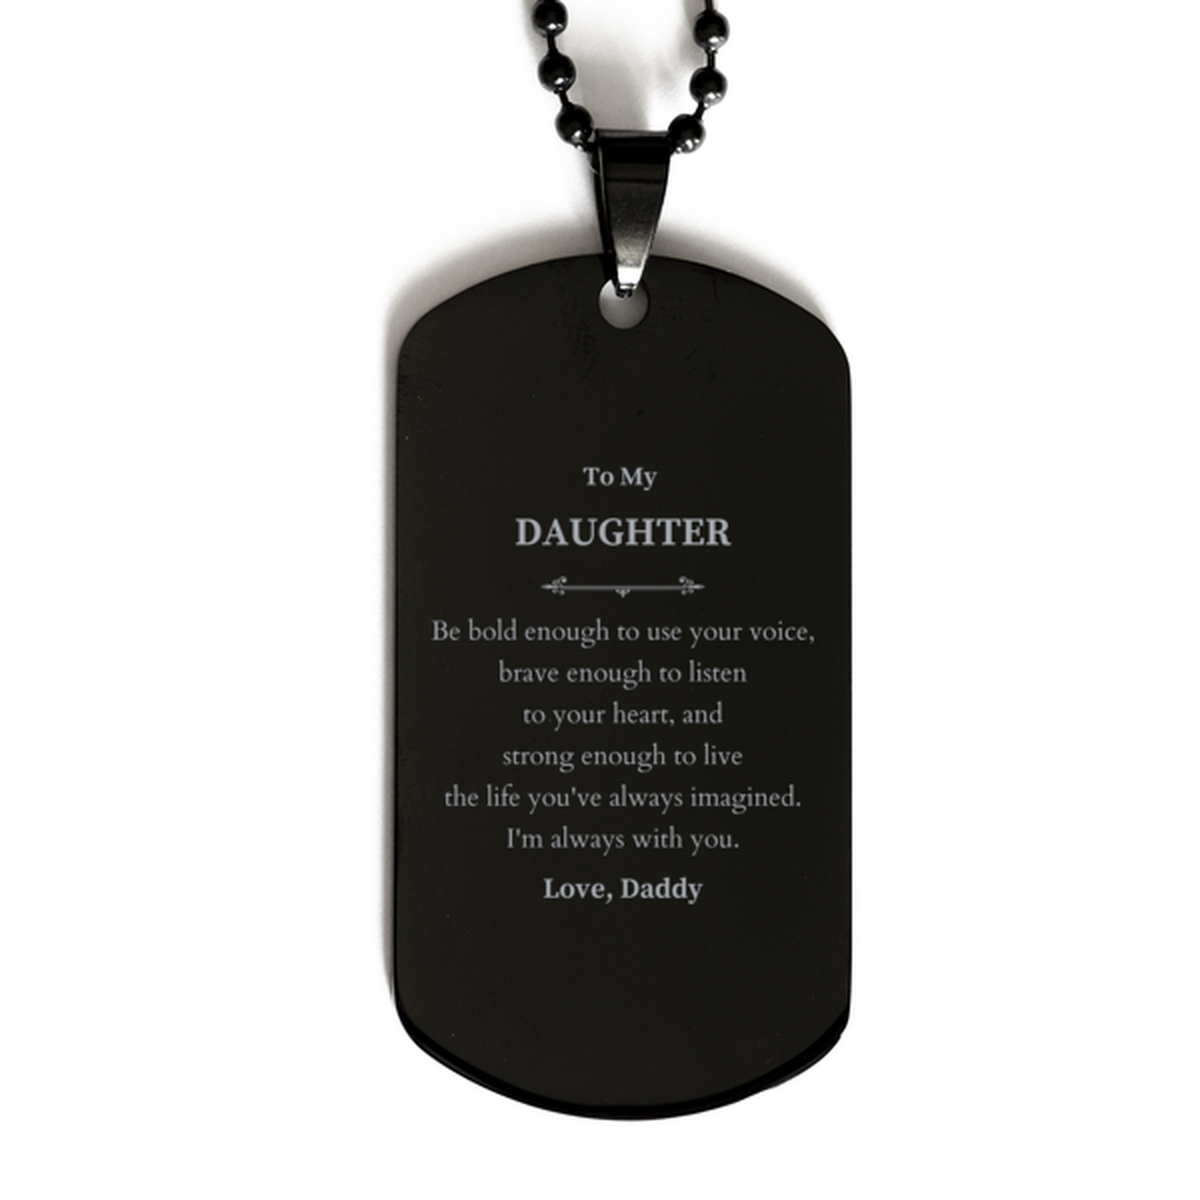 Keepsake Daughter Black Dog Tag Gift Idea Graduation Christmas Birthday Daughter from Daddy, Daughter Be bold enough to use your voice, brave enough to listen to your heart. Love, Daddy